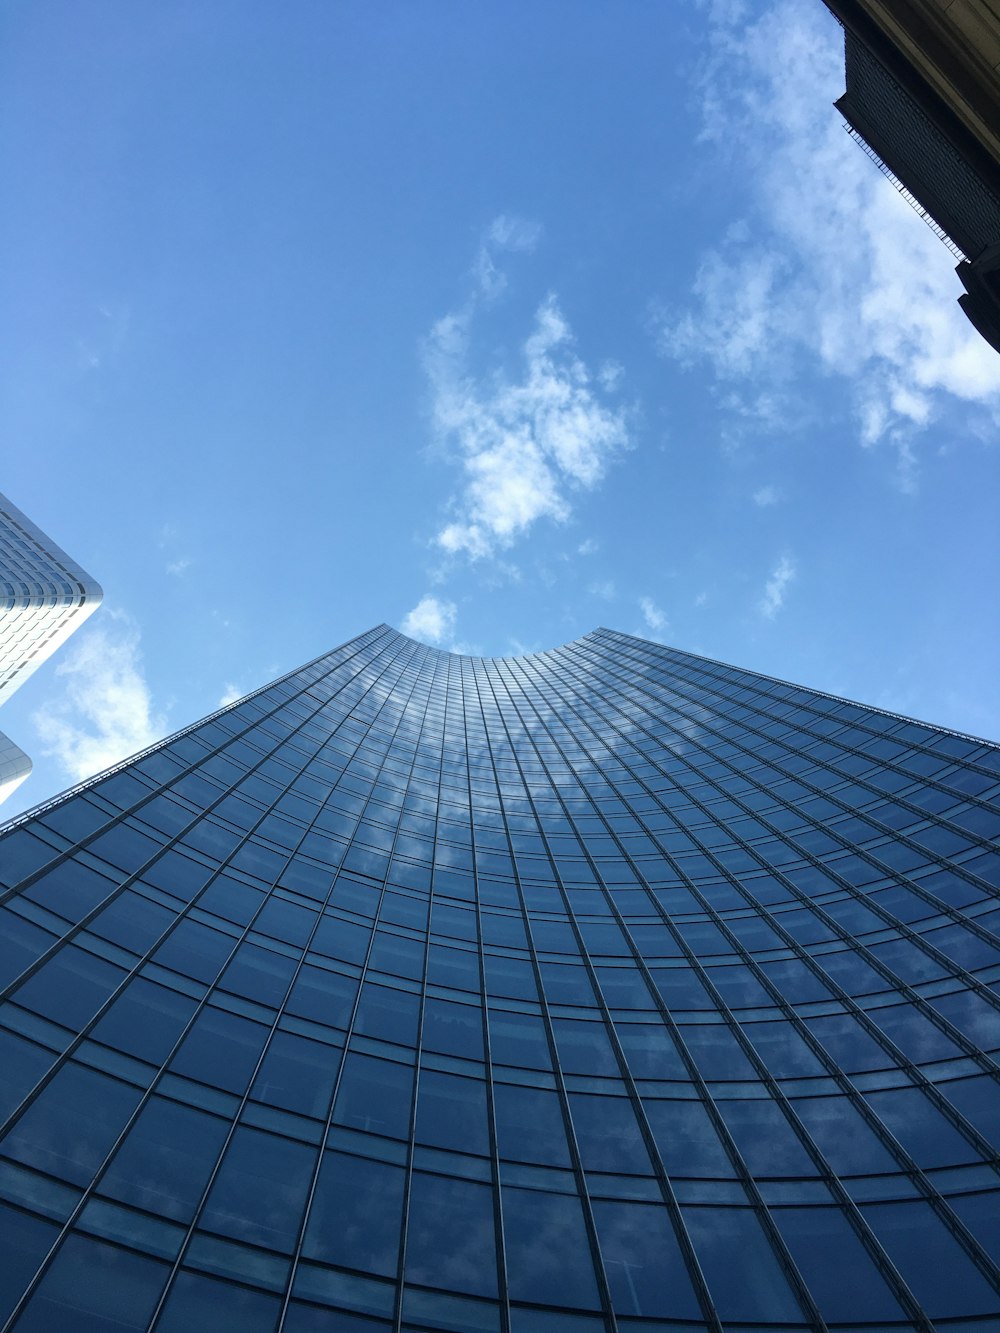 looking up at a tall building with a blue sky in the background